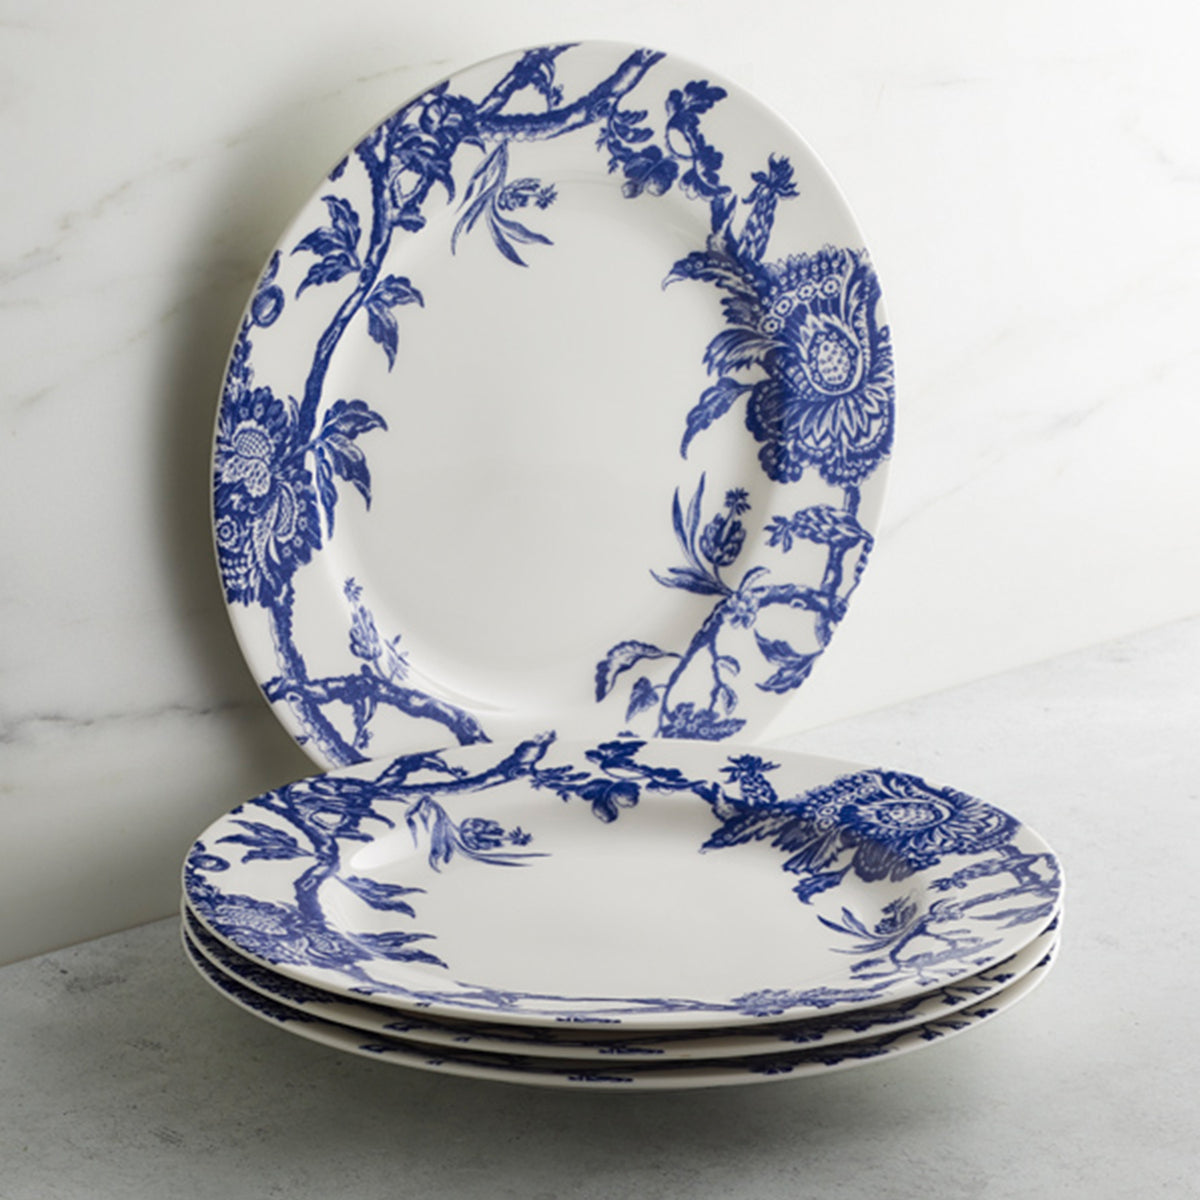 A premium porcelain dinnerware collection featuring a set of Arcadia Blue Rimmed Dinner Plates with floral designs, by Caskata Artisanal Home.